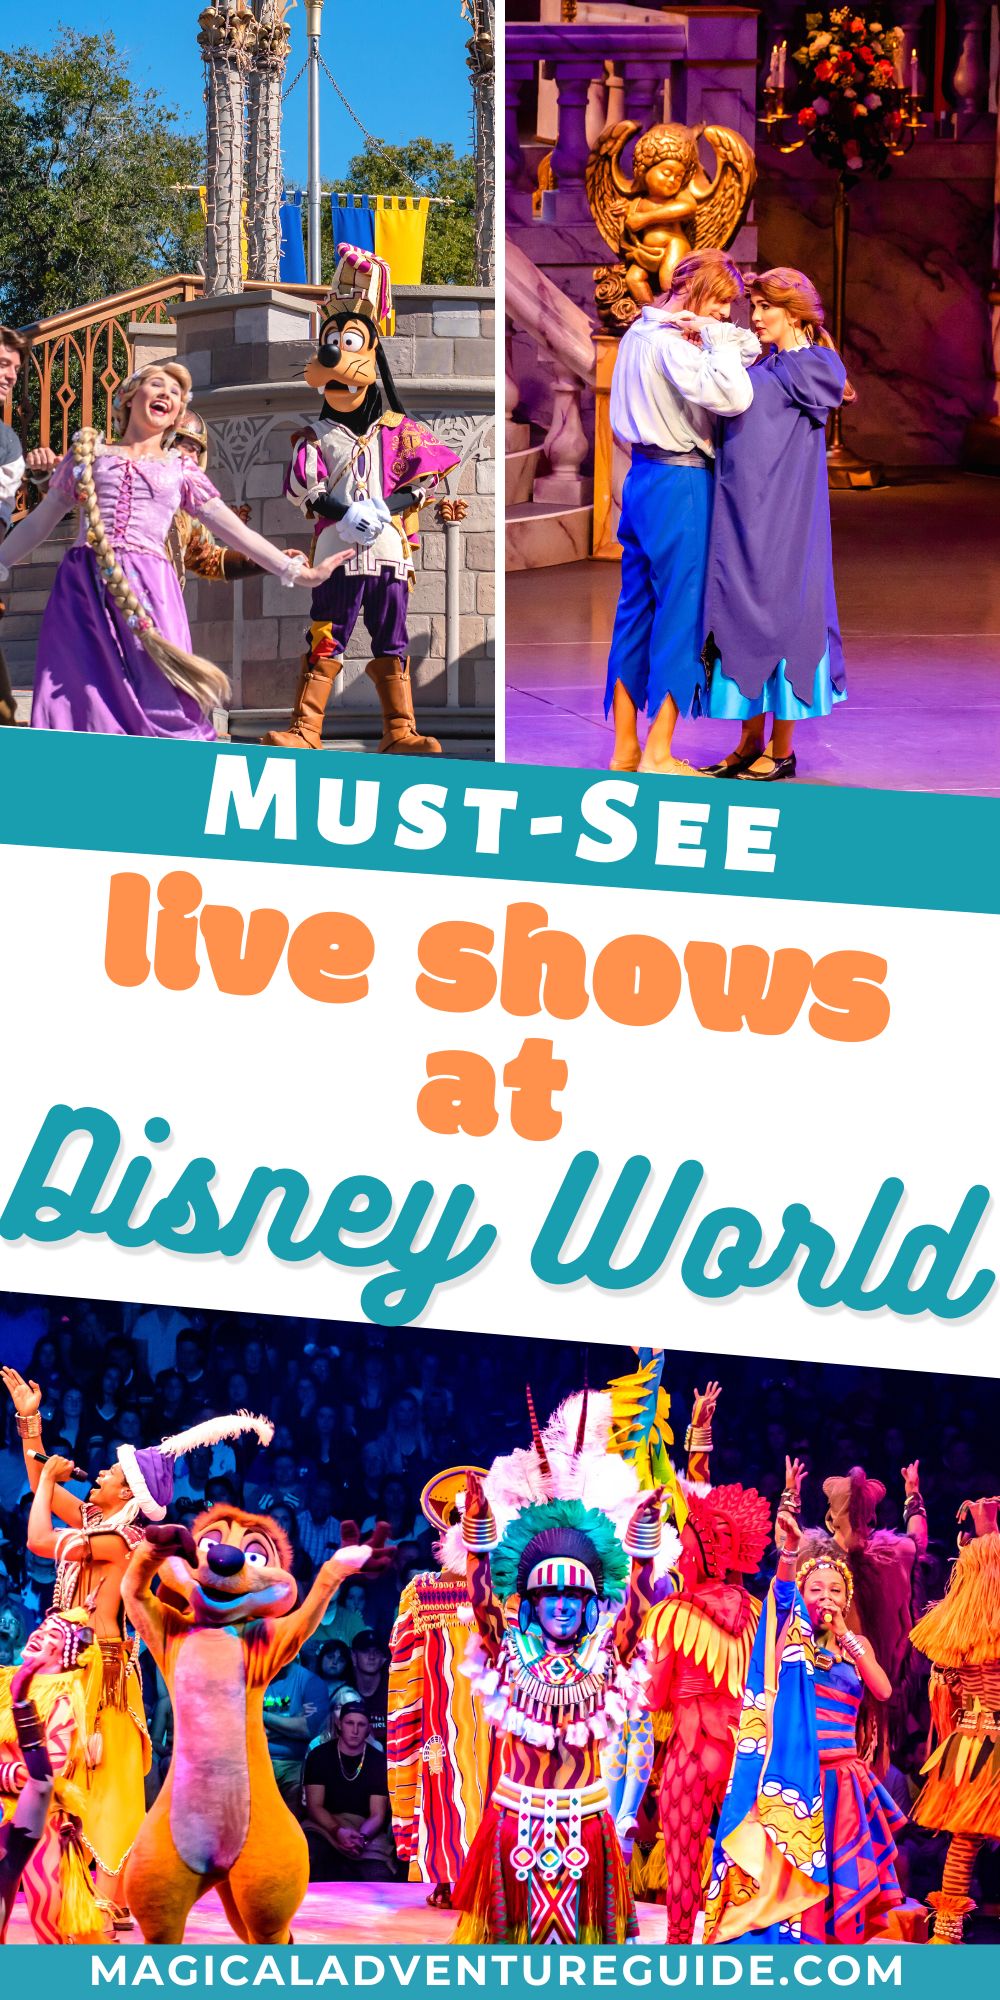 collage image featuring three live shows at Disney World that are fantastic performances.